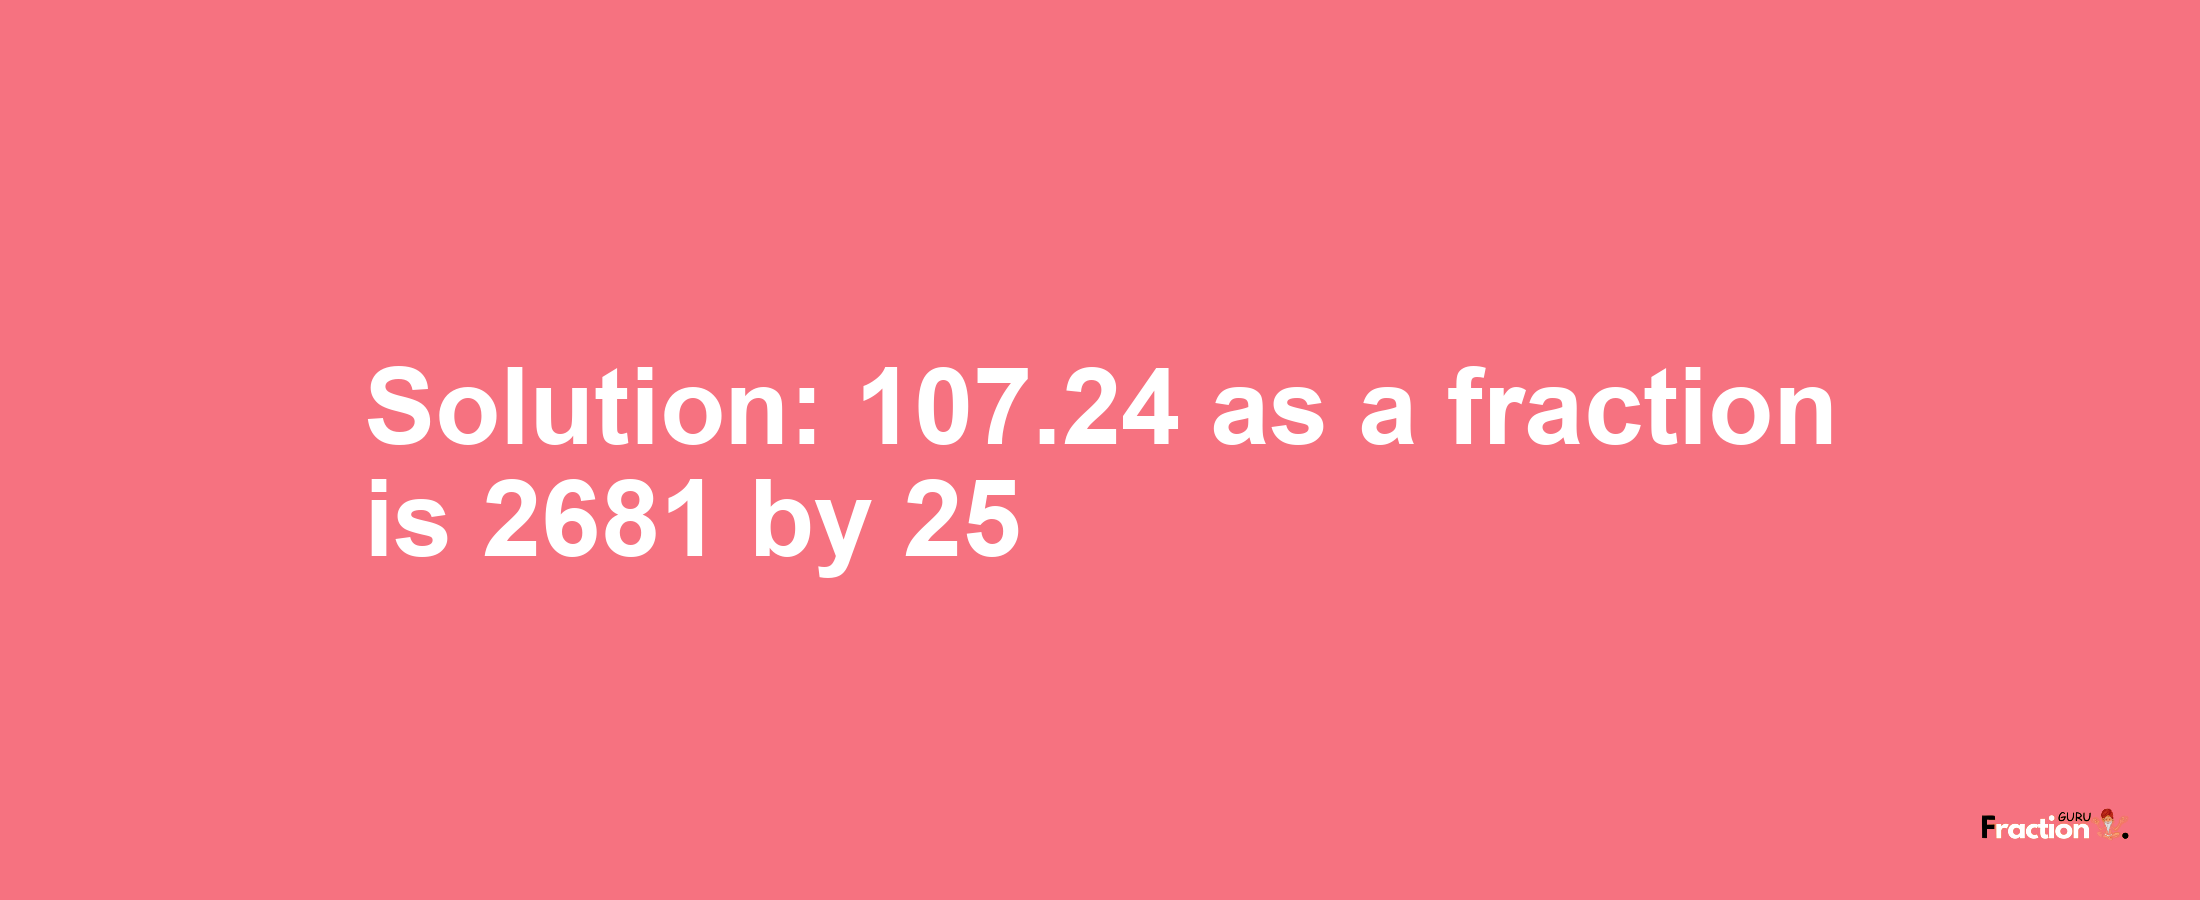 Solution:107.24 as a fraction is 2681/25